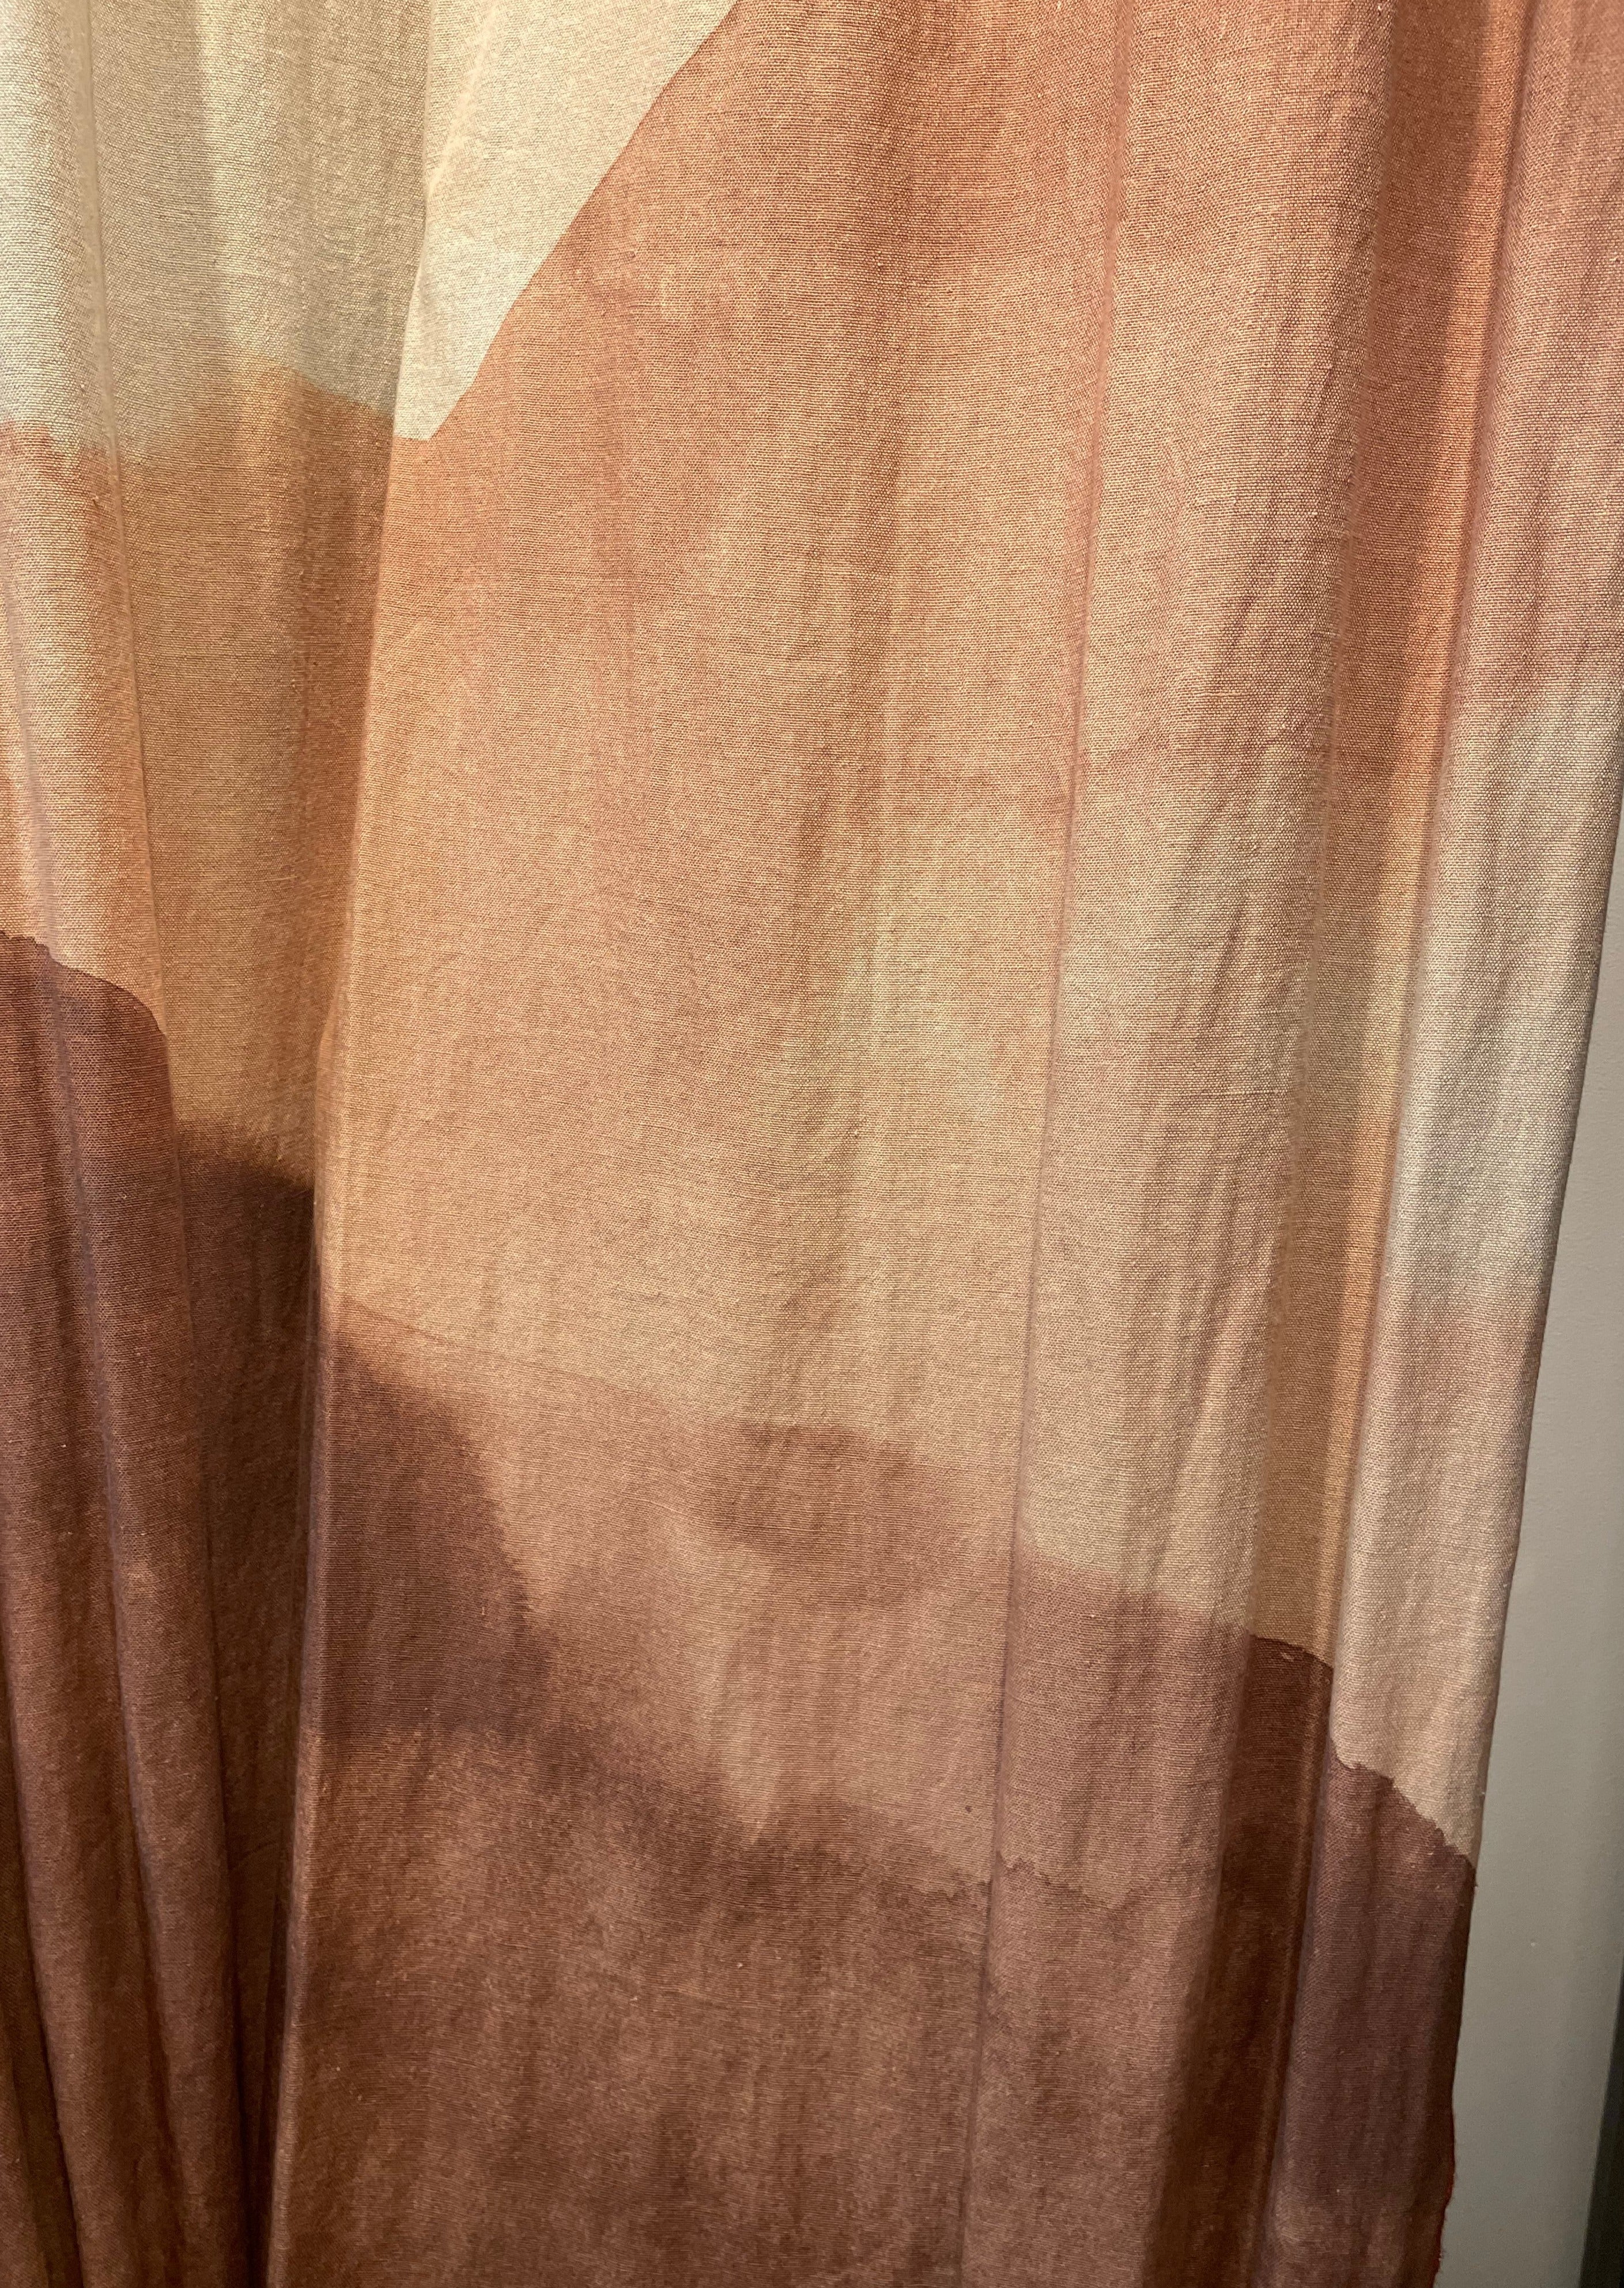 Hand Dyed Organic Cotton Curtains